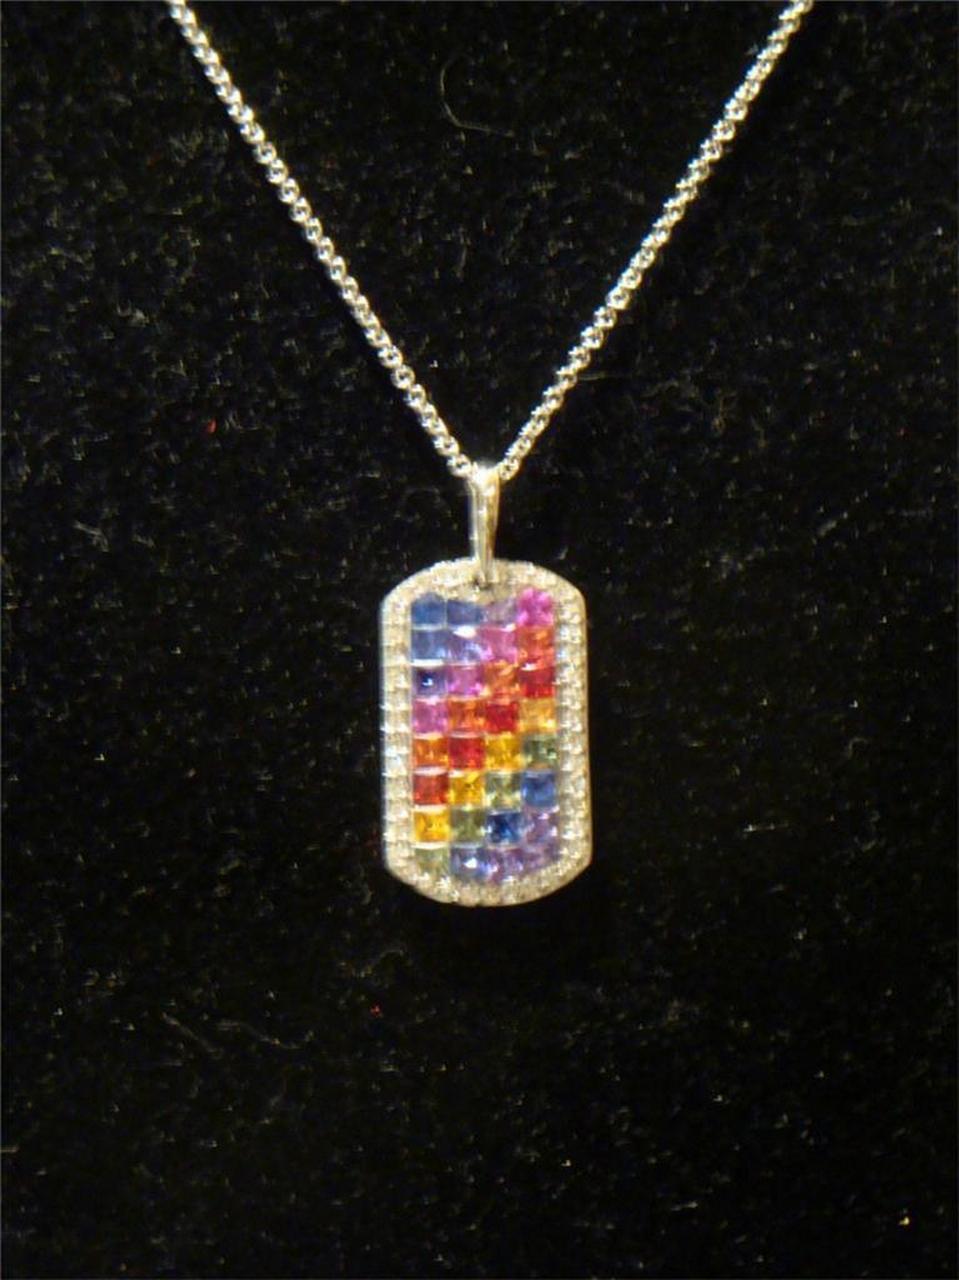 The Following Item we are offering is this Beautiful Rare Important 18KT Italian White Gold Blue, Purple, Orange, Red, Green Sapphire and Diamond Pendant Tag Necklace. Necklace is comprised of 3 1/2 Carats of Fine Colorful Genuine Multi Colored